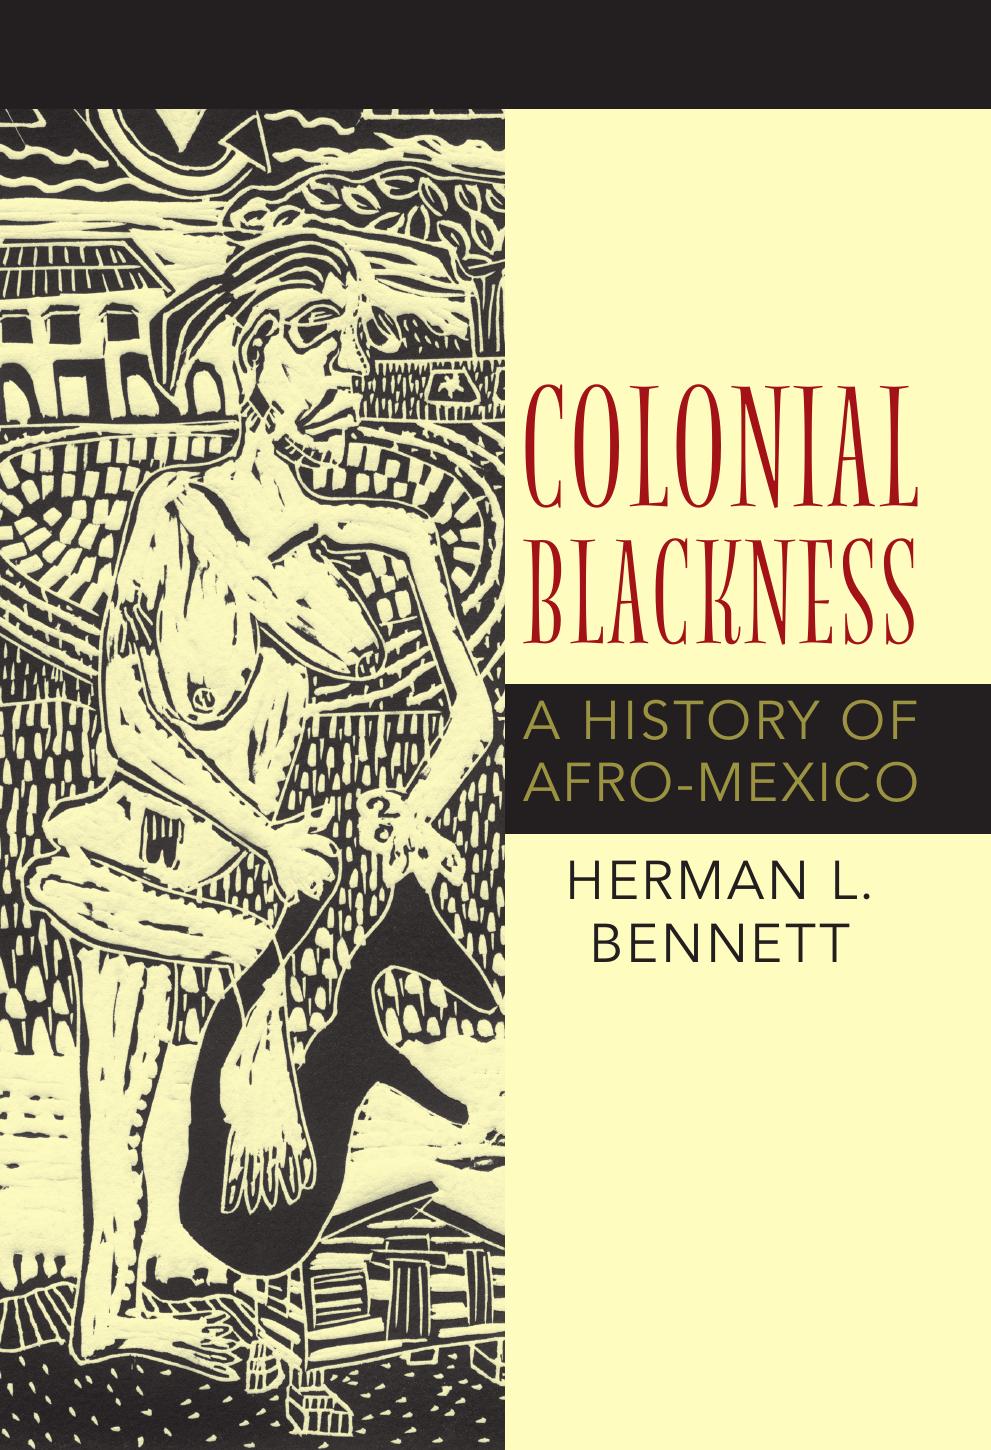 Colonial Blackness : A History of Afro-Mexico by Herman L. Bennett